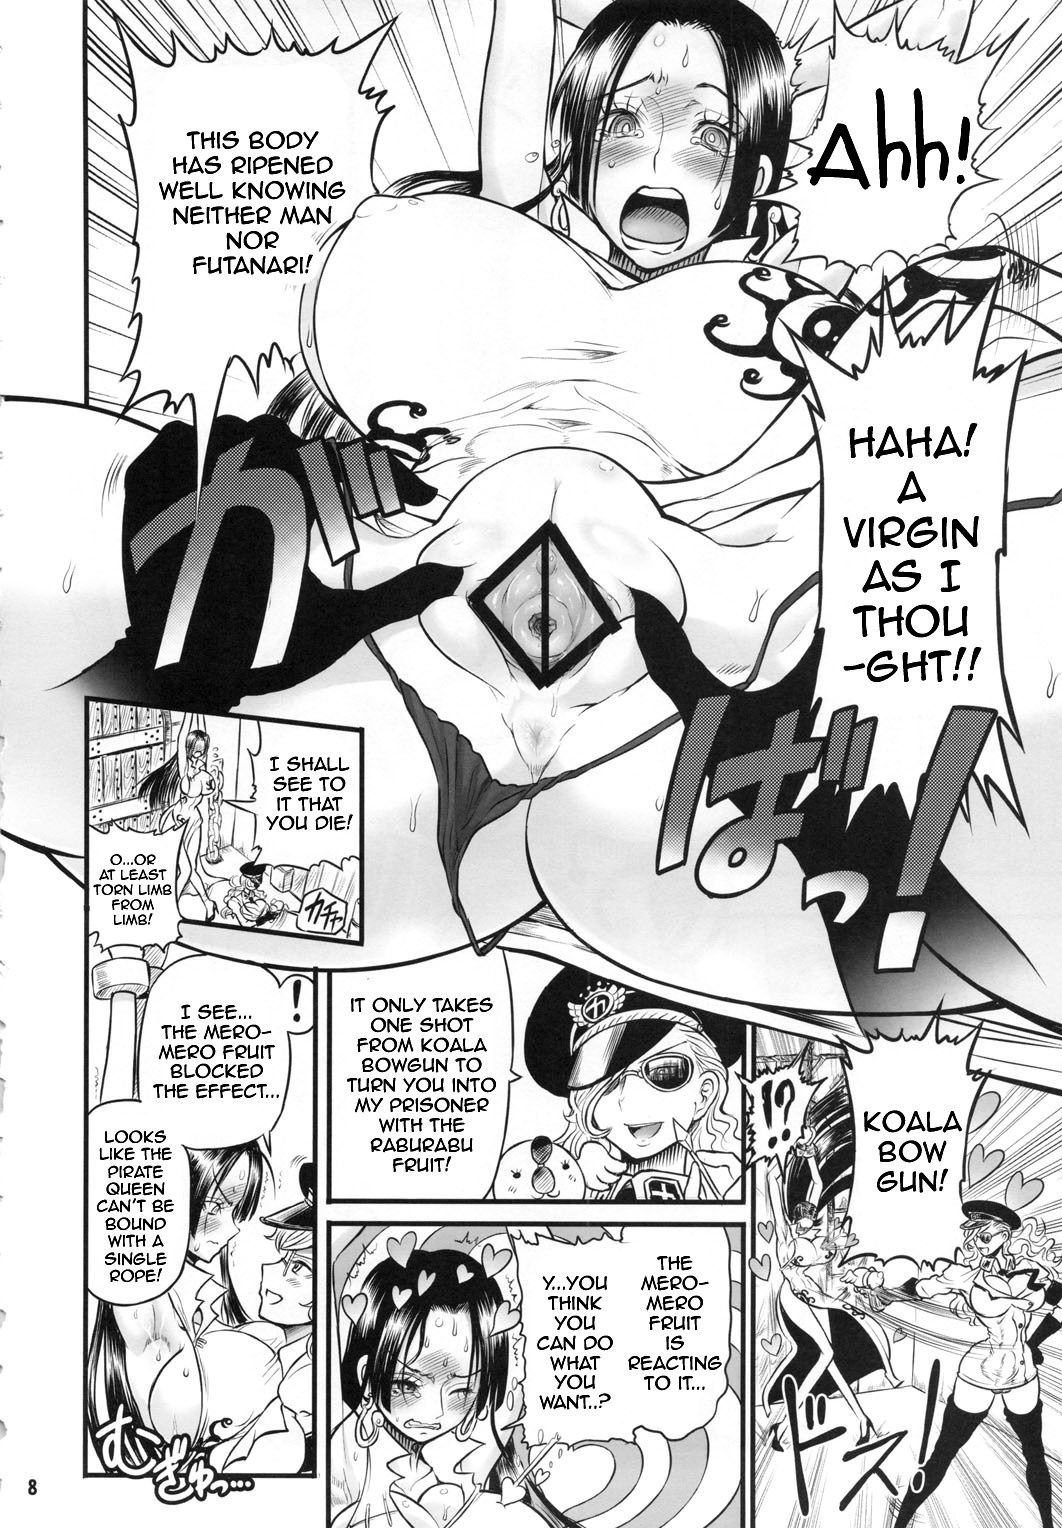 Bloom pirate hooker queen hentai manga picture 02